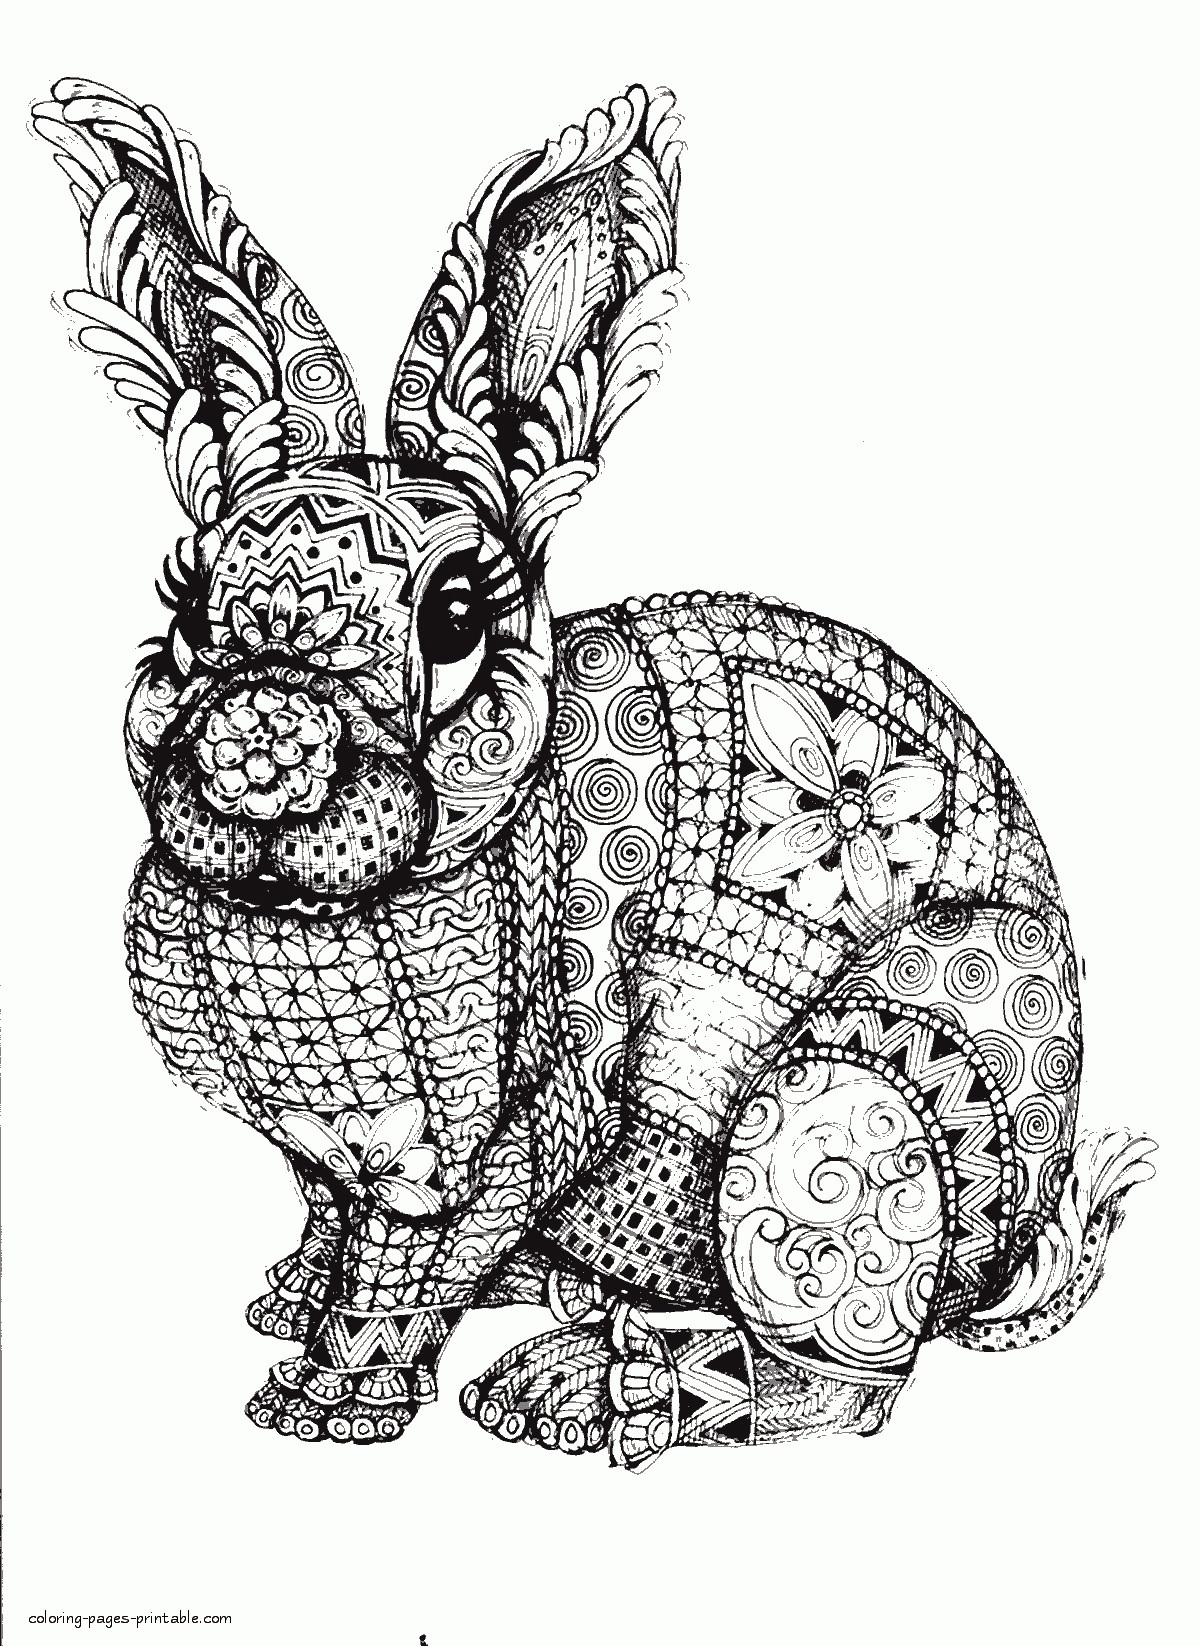 Coloring Pages For Adults Difficult Animals
 Difficult Animal Coloring Pages A Rabbit COLORING